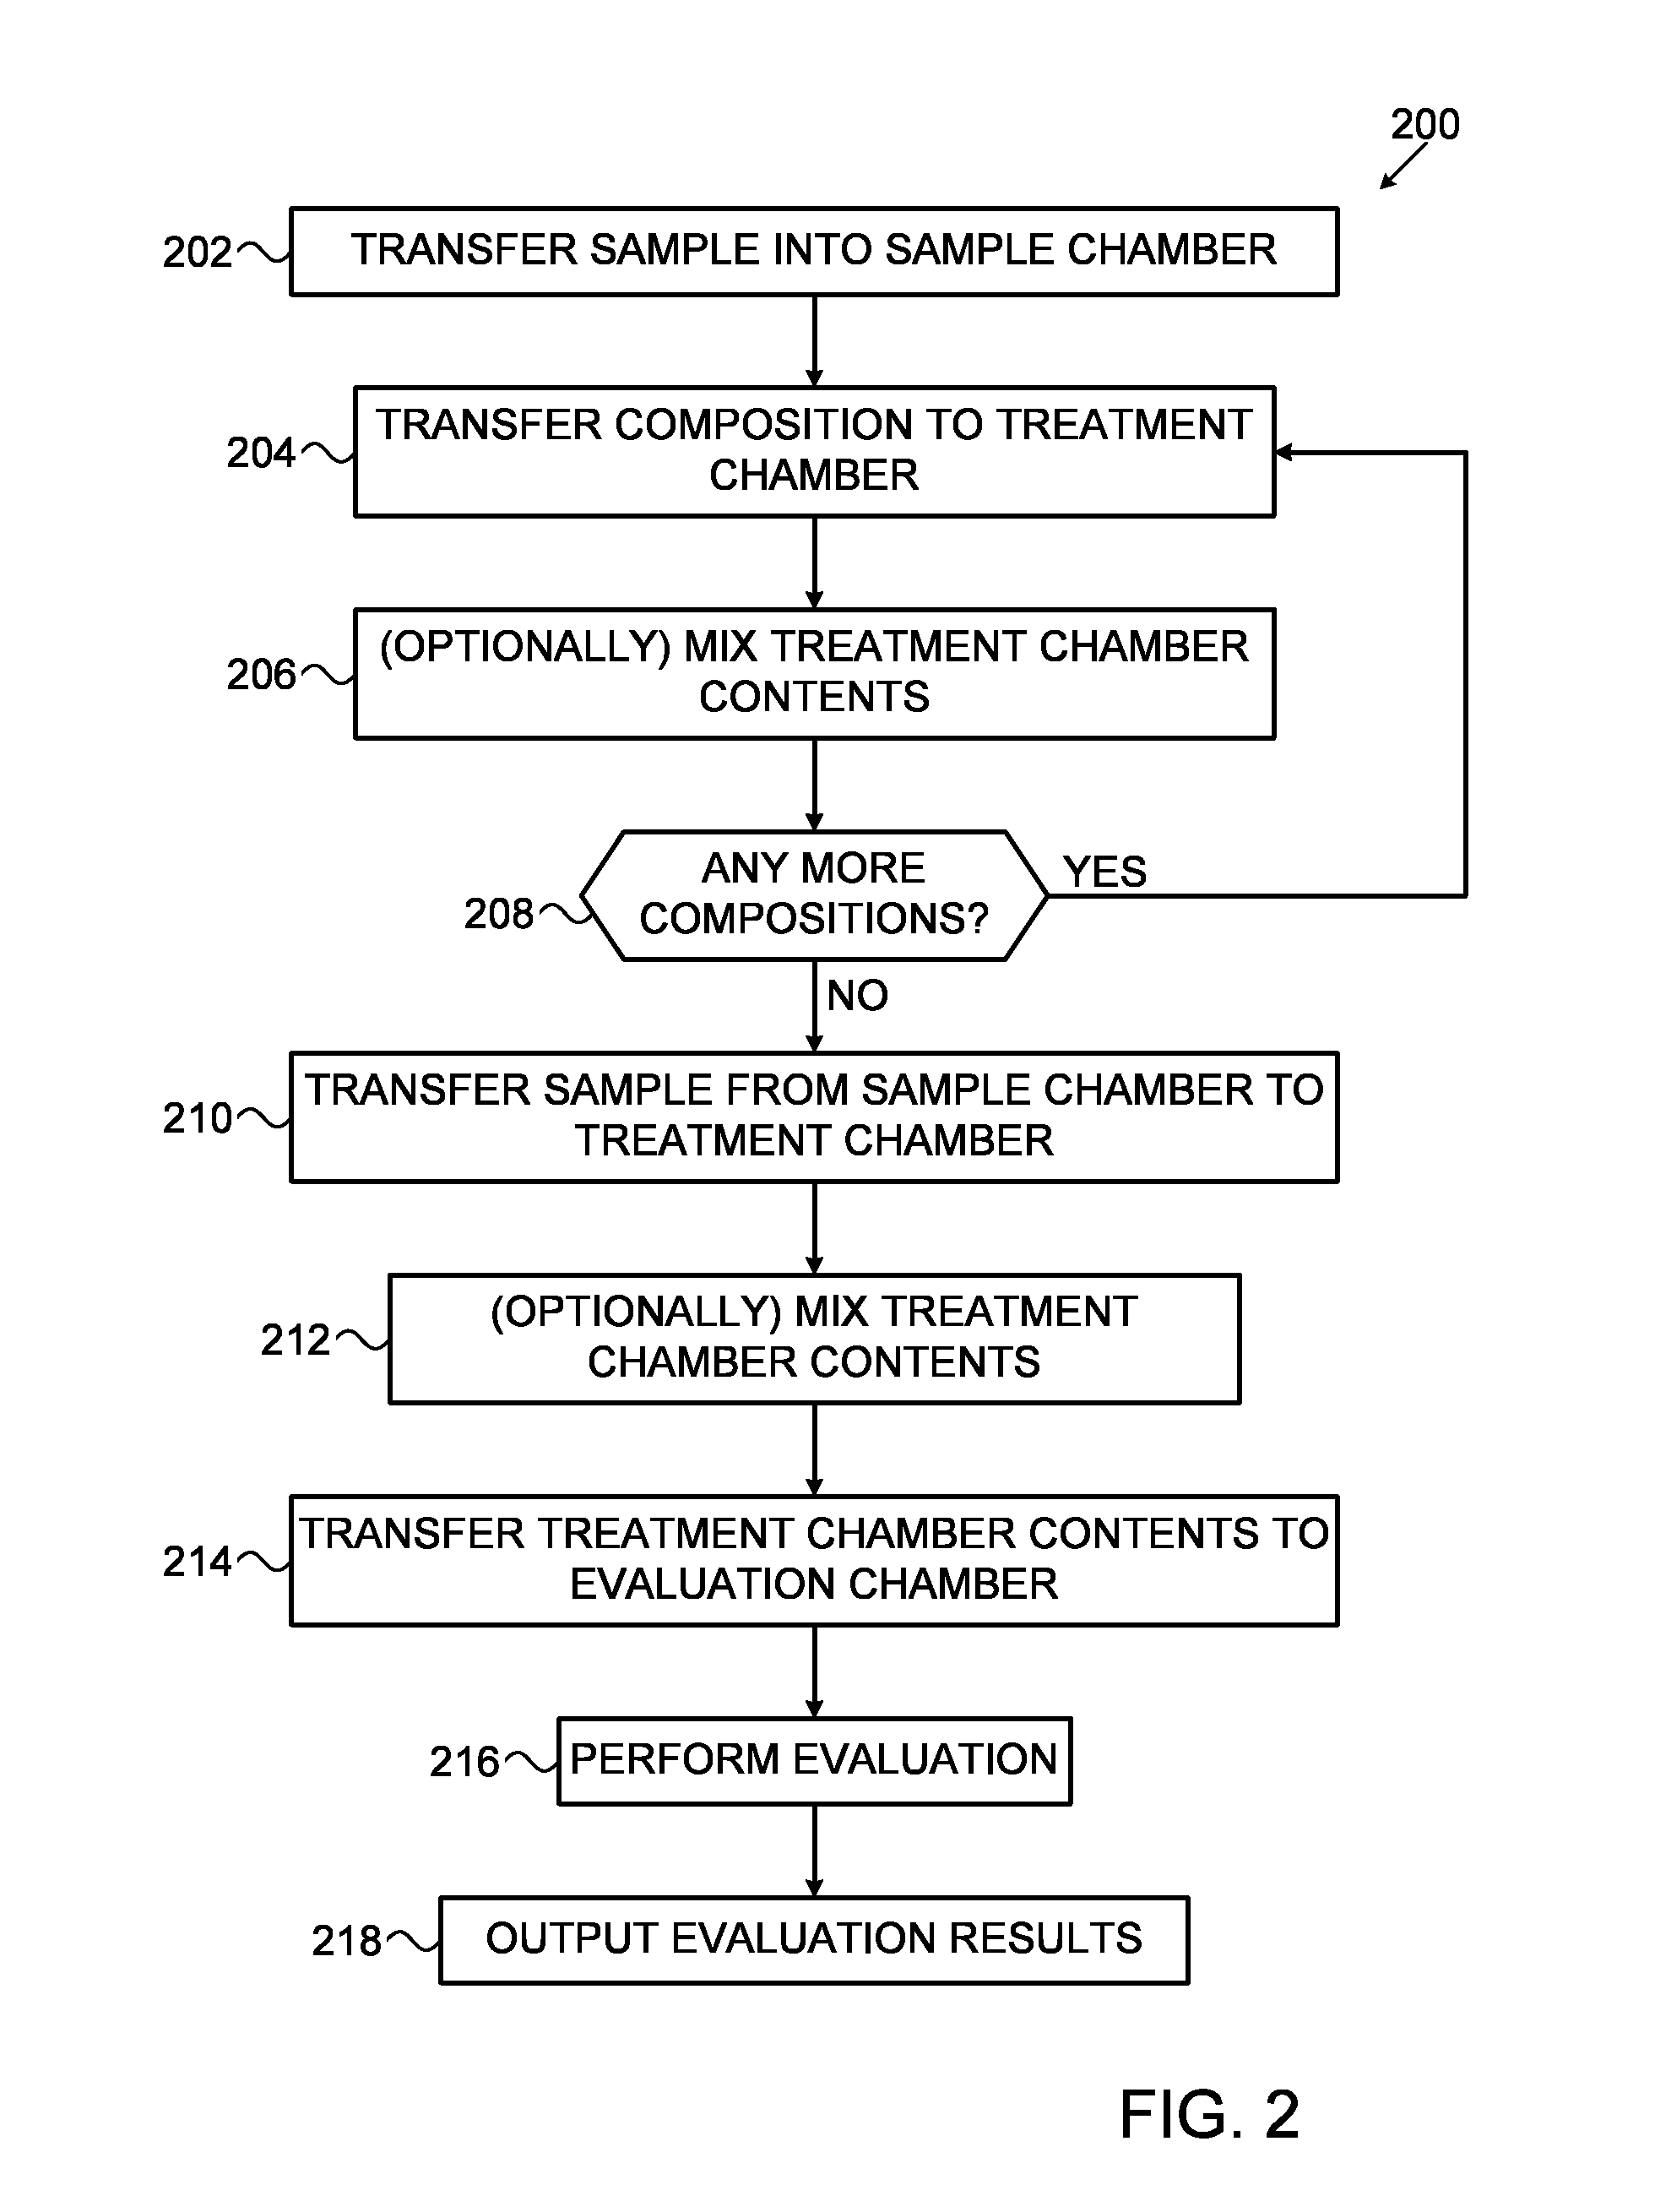 Kits, compositions and methods for detecting a biological condition